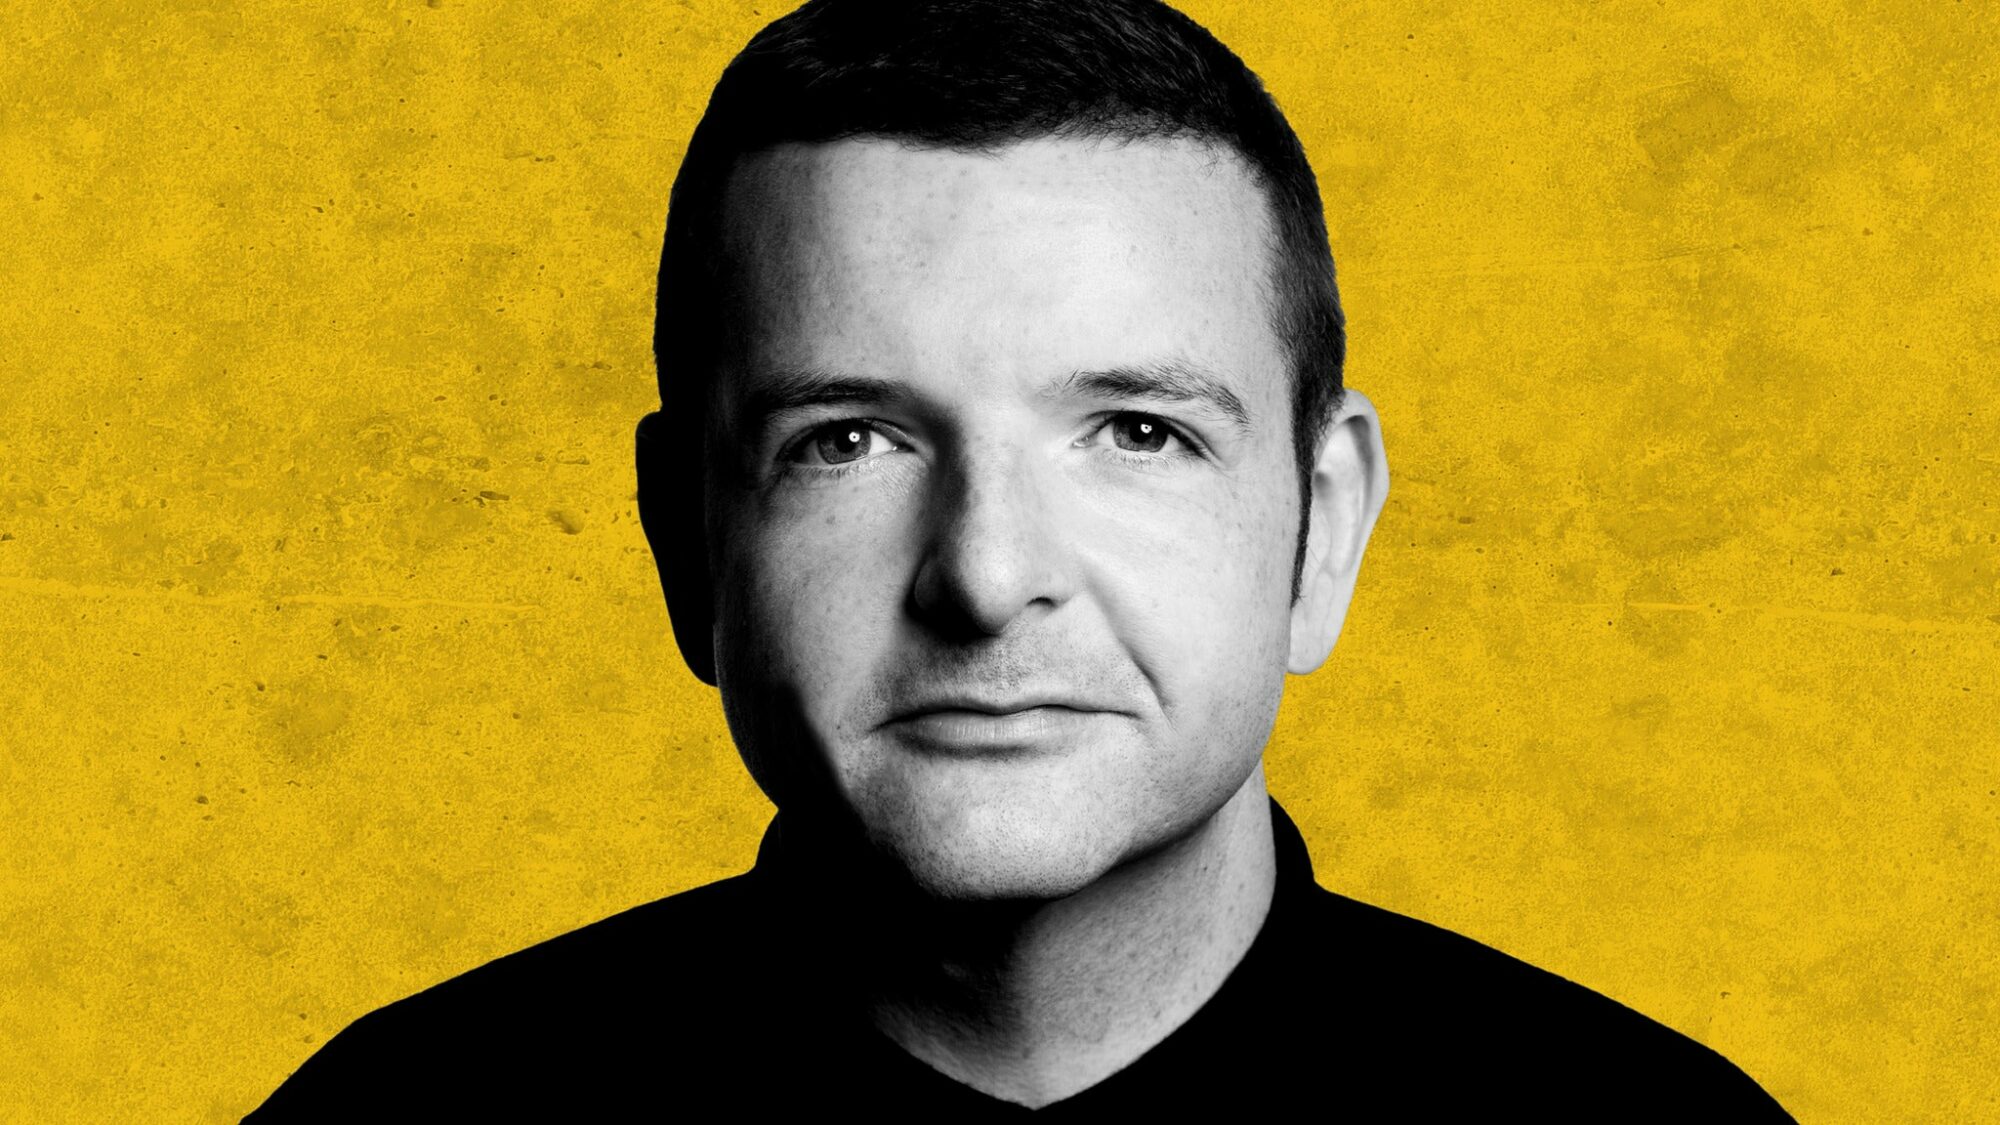 Image name Kevin Bridges The Overdue Catch Up at Leeds Grand Theatre Leeds the 1 image from the post Kevin Bridges: The Overdue Catch-Up at Leeds Grand Theatre, Leeds in Yorkshire.com.